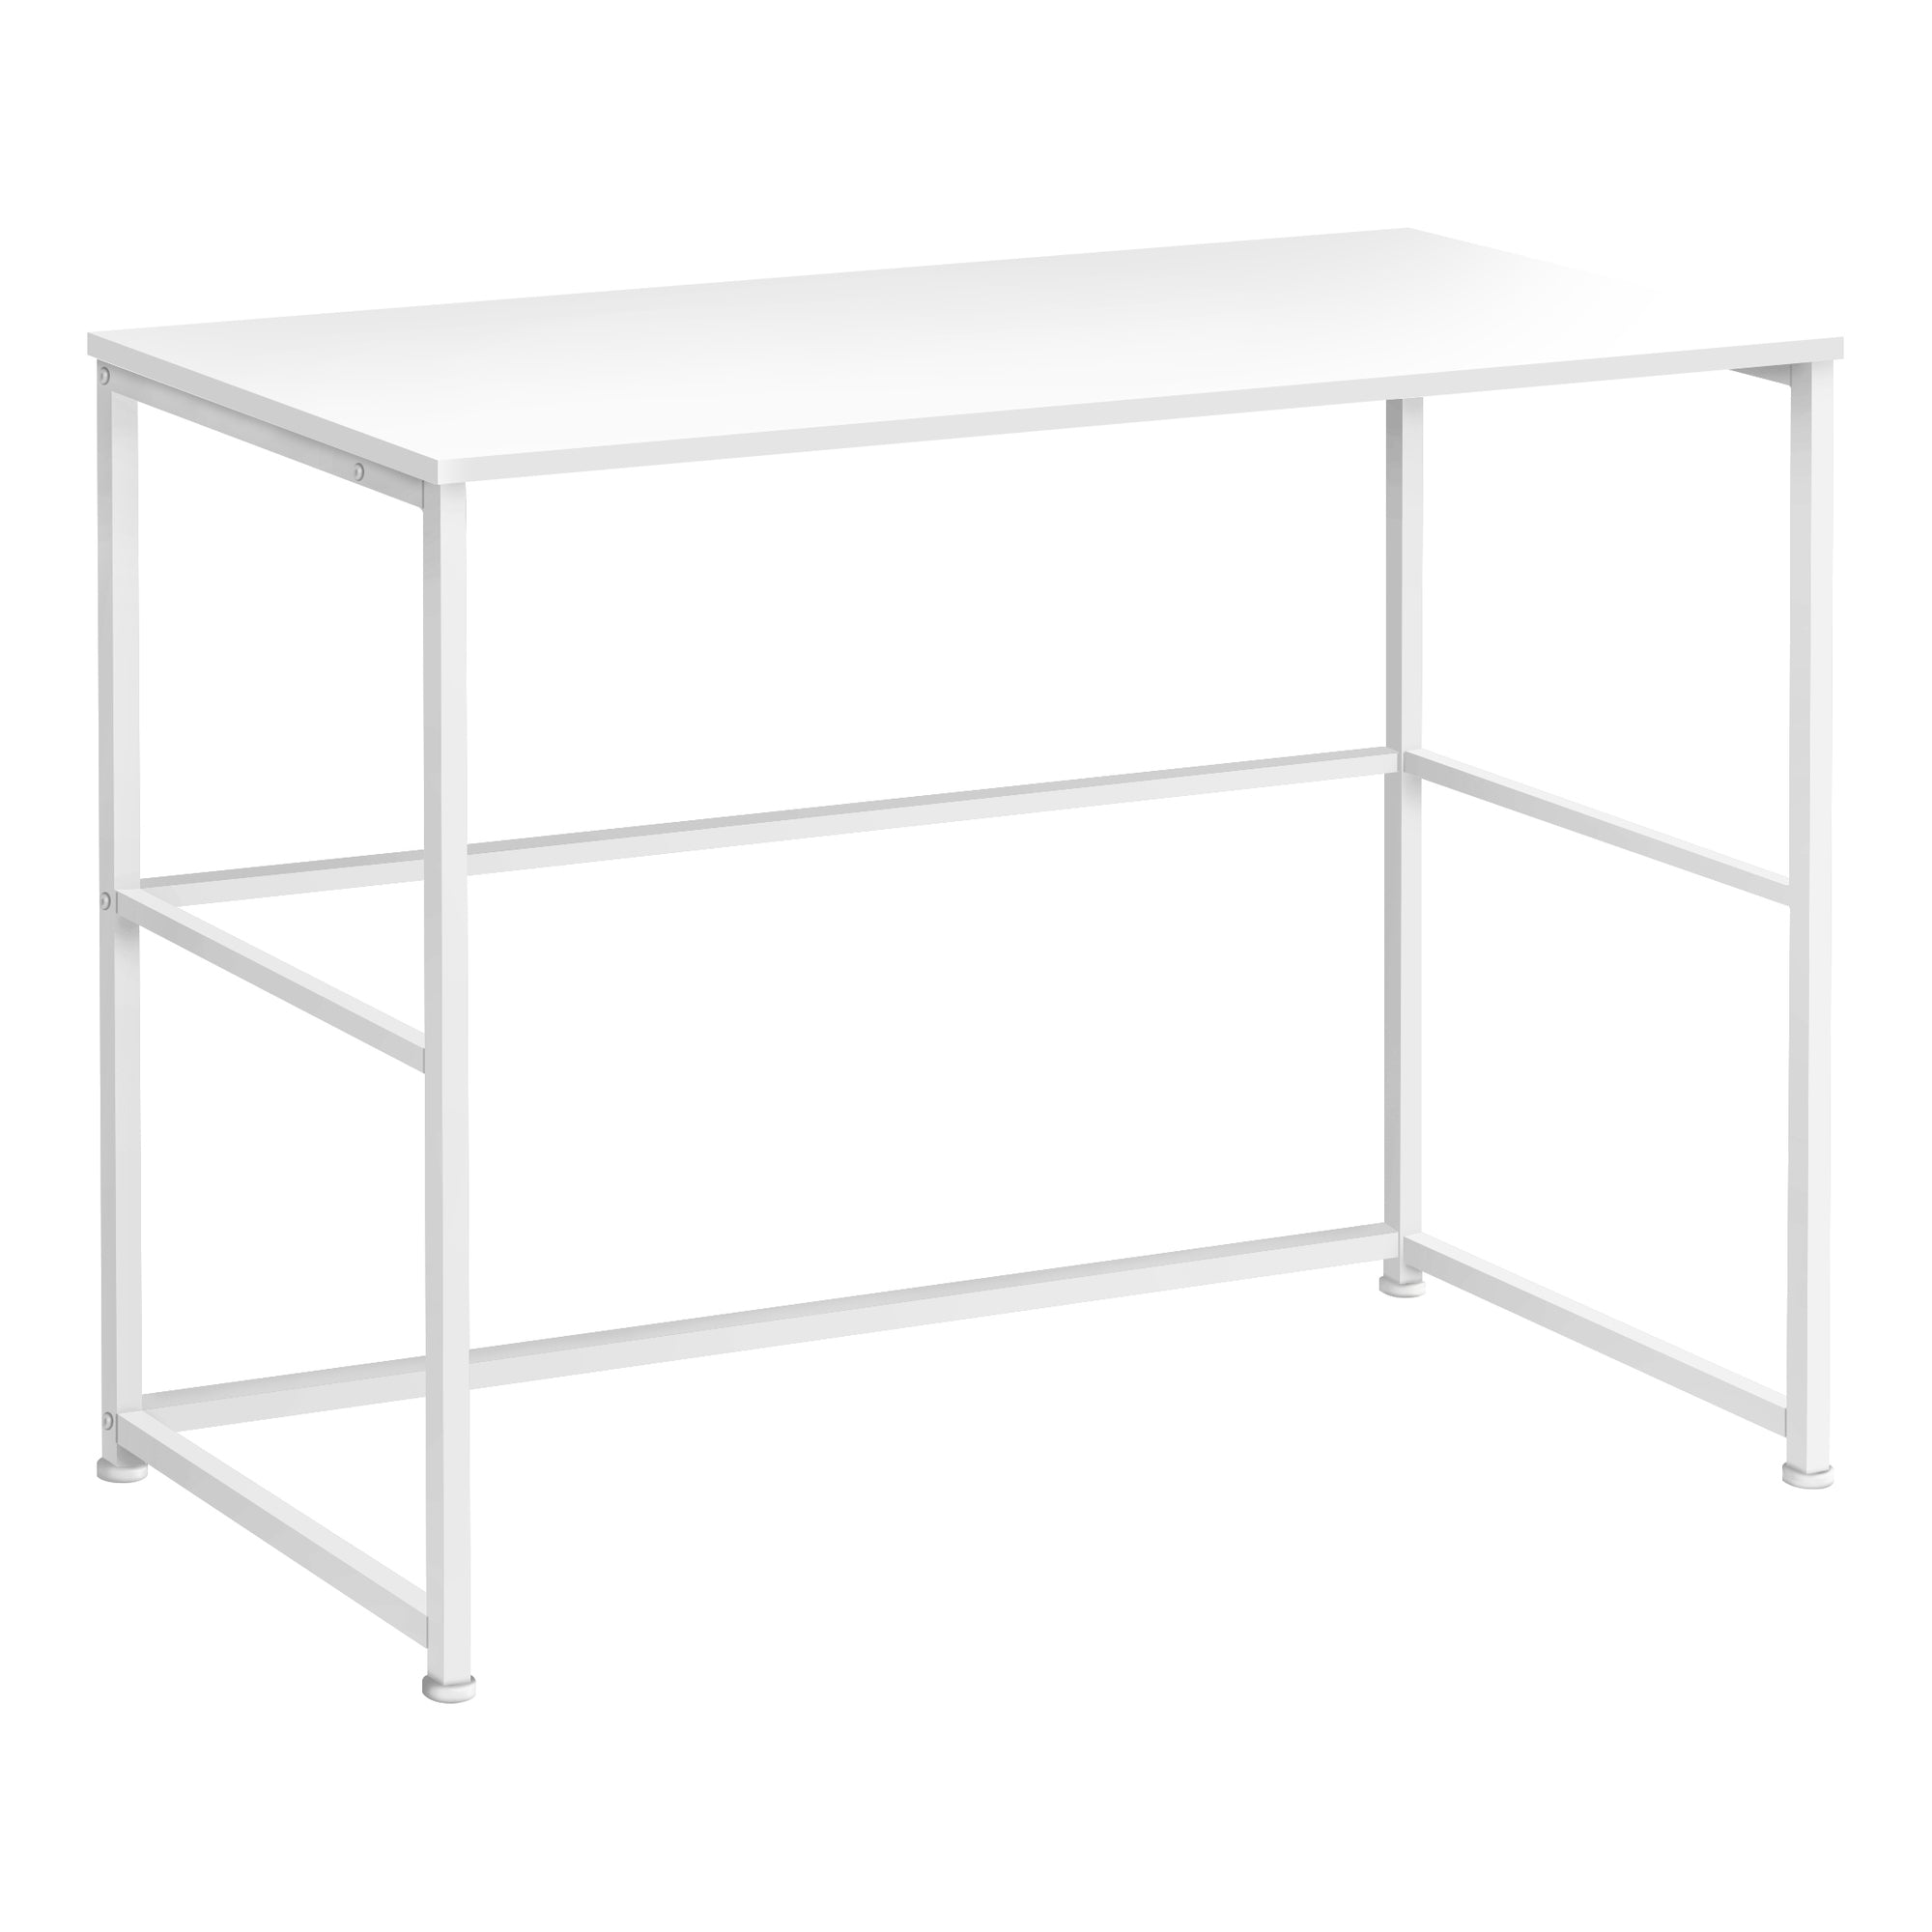 MN-247775    Computer Desk - Small Writing Or Laptop Table / Modern Style / Metal Frame - 40"L - White / White